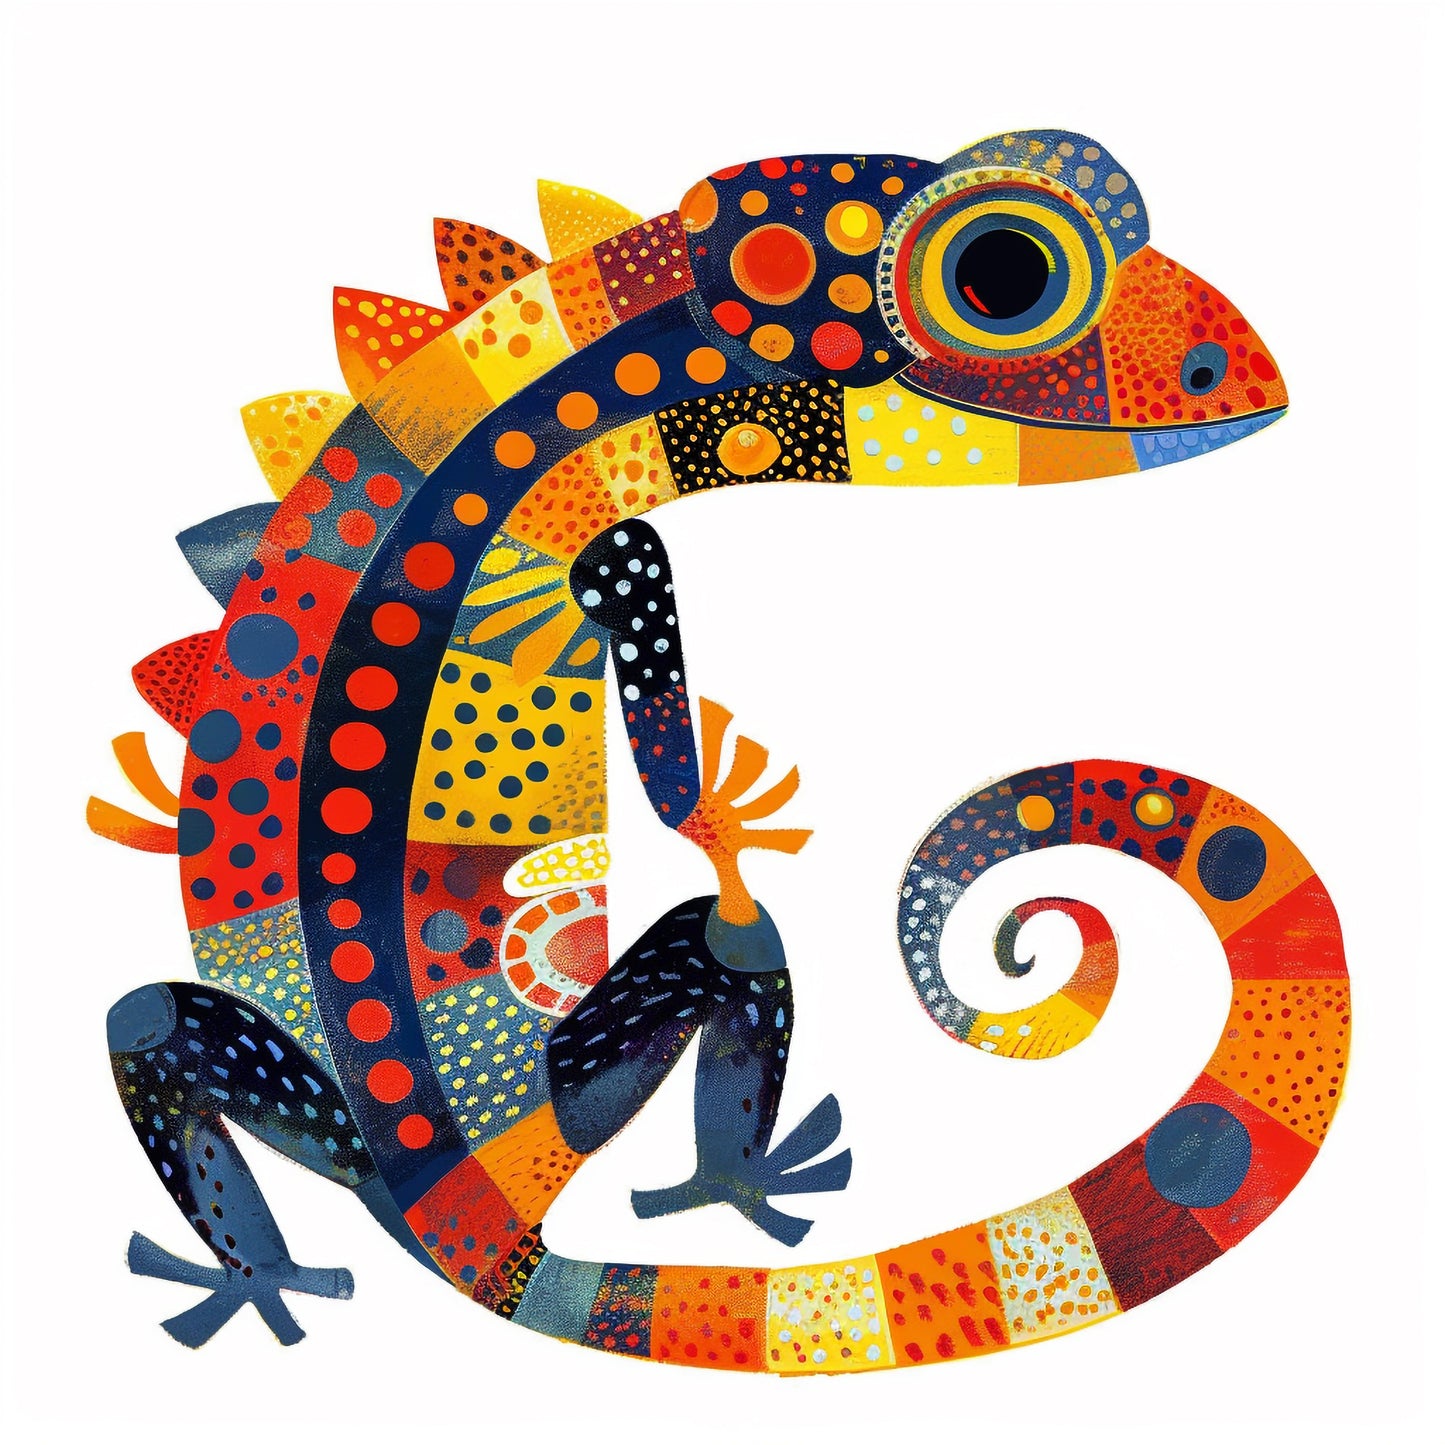 Colorful Illustrated Lizard in a Minimalist Style Artwork